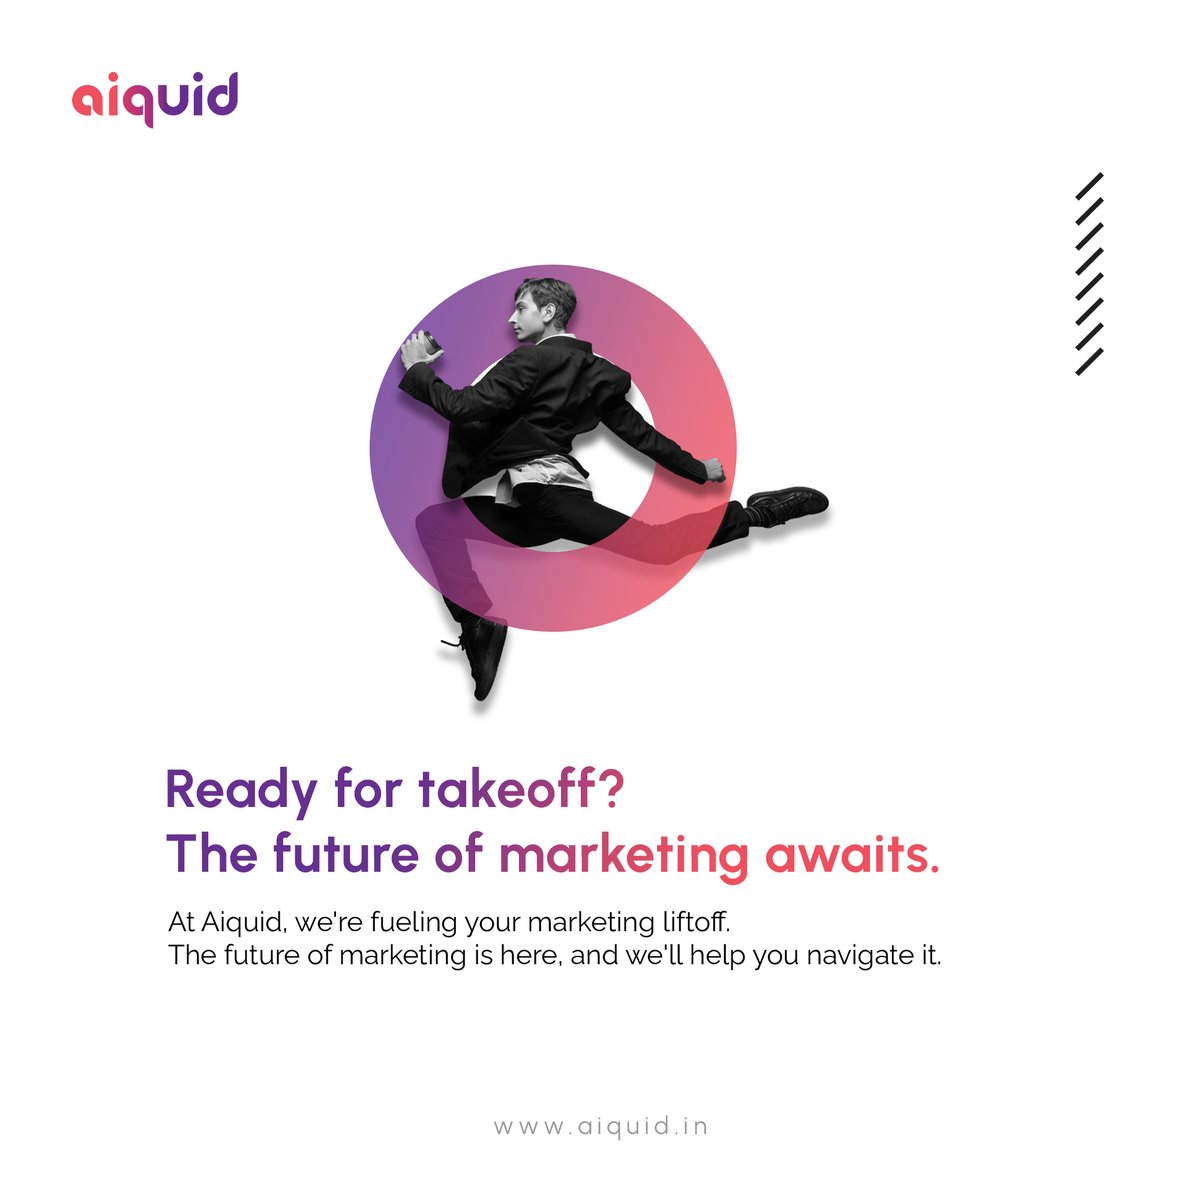 Leave outdated marketing strategies behind. We're blasting off to a future of innovation! #MarketingRevolution #JoinTheJourney #digitalmarketing #performancemarketing #aiquid